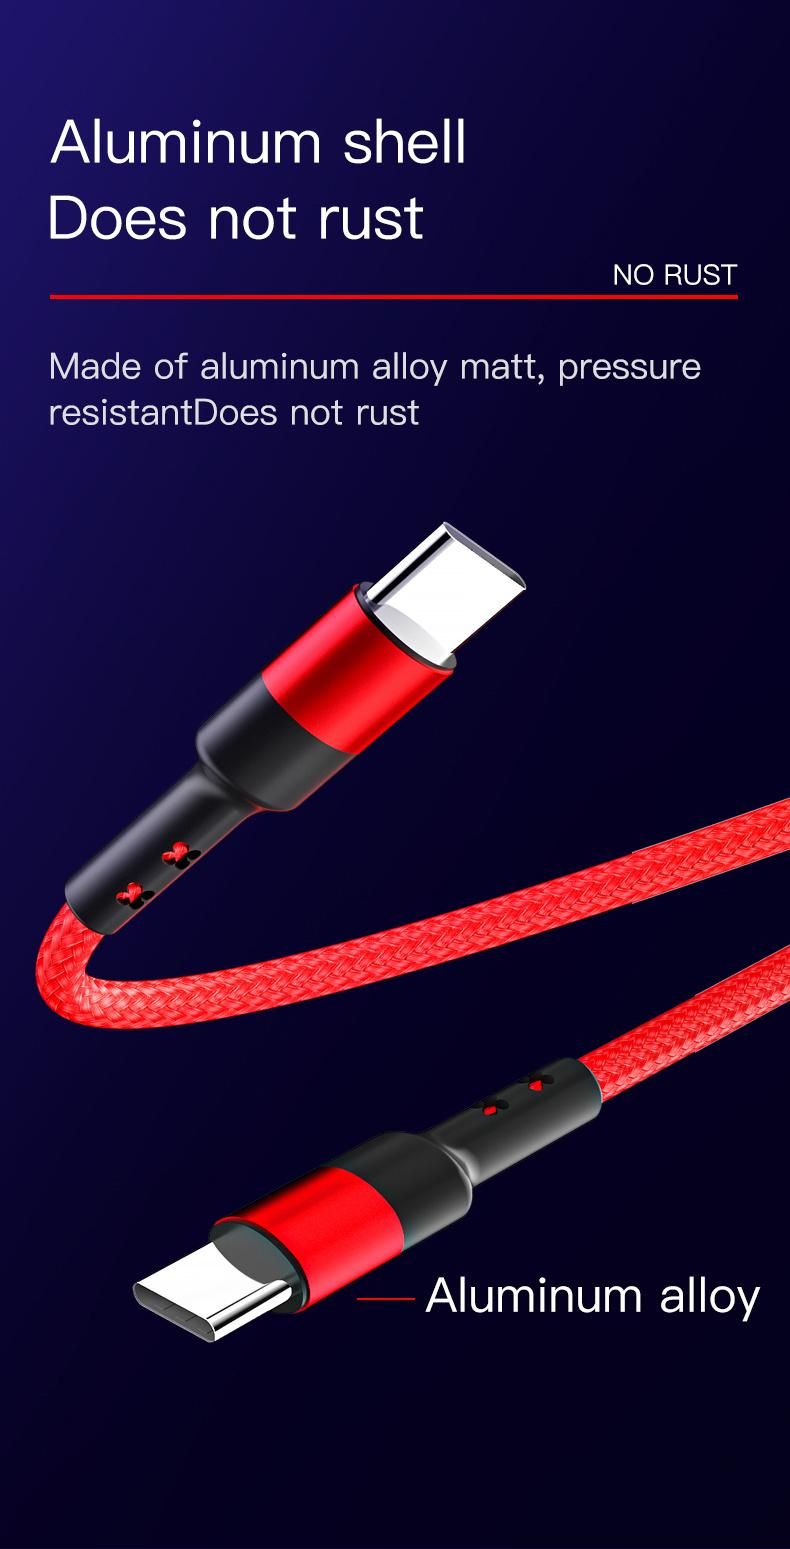 Best Selling Nylon Braided Type-C USB C to C Pd 18W Fast Charging Data Cable for Huawei Mate 10 Tablet Cables